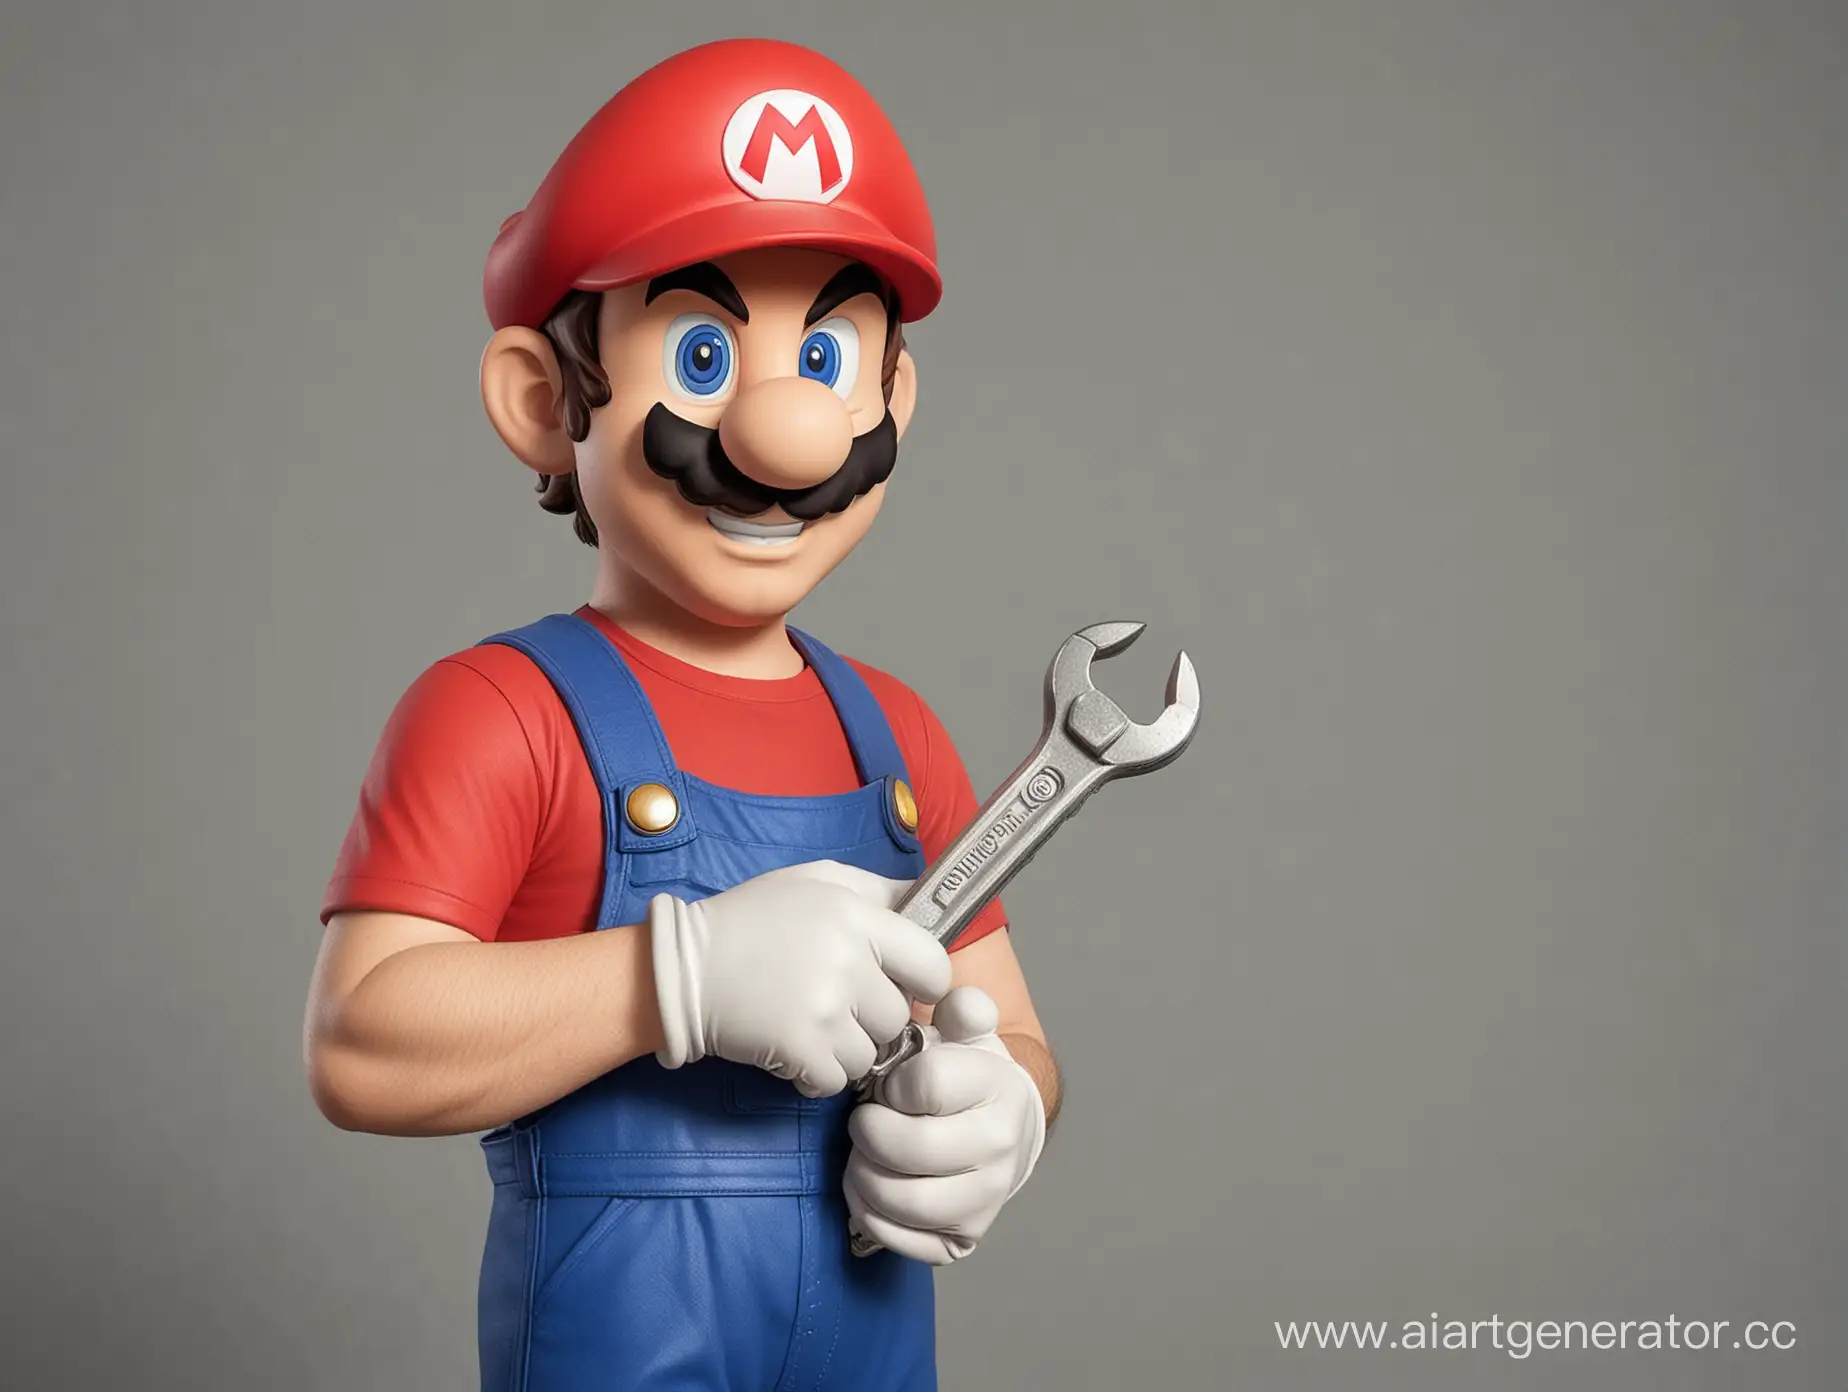 Mechanic-Mario-Holding-a-Wrench